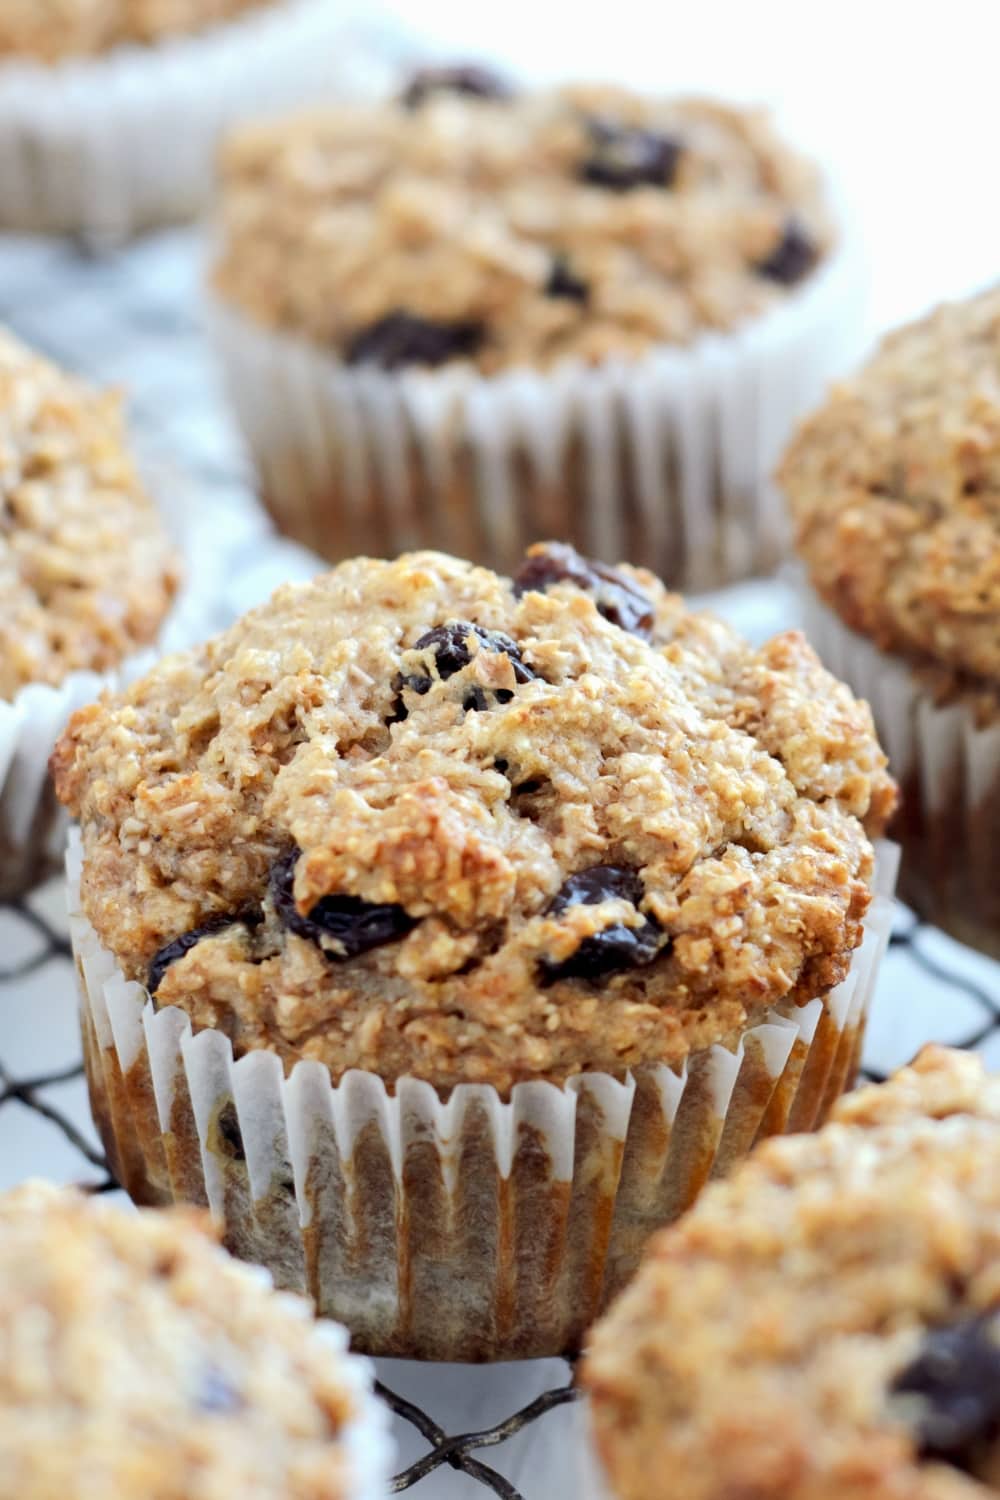 Baked Wholewheat Bran Muffins with Raisins